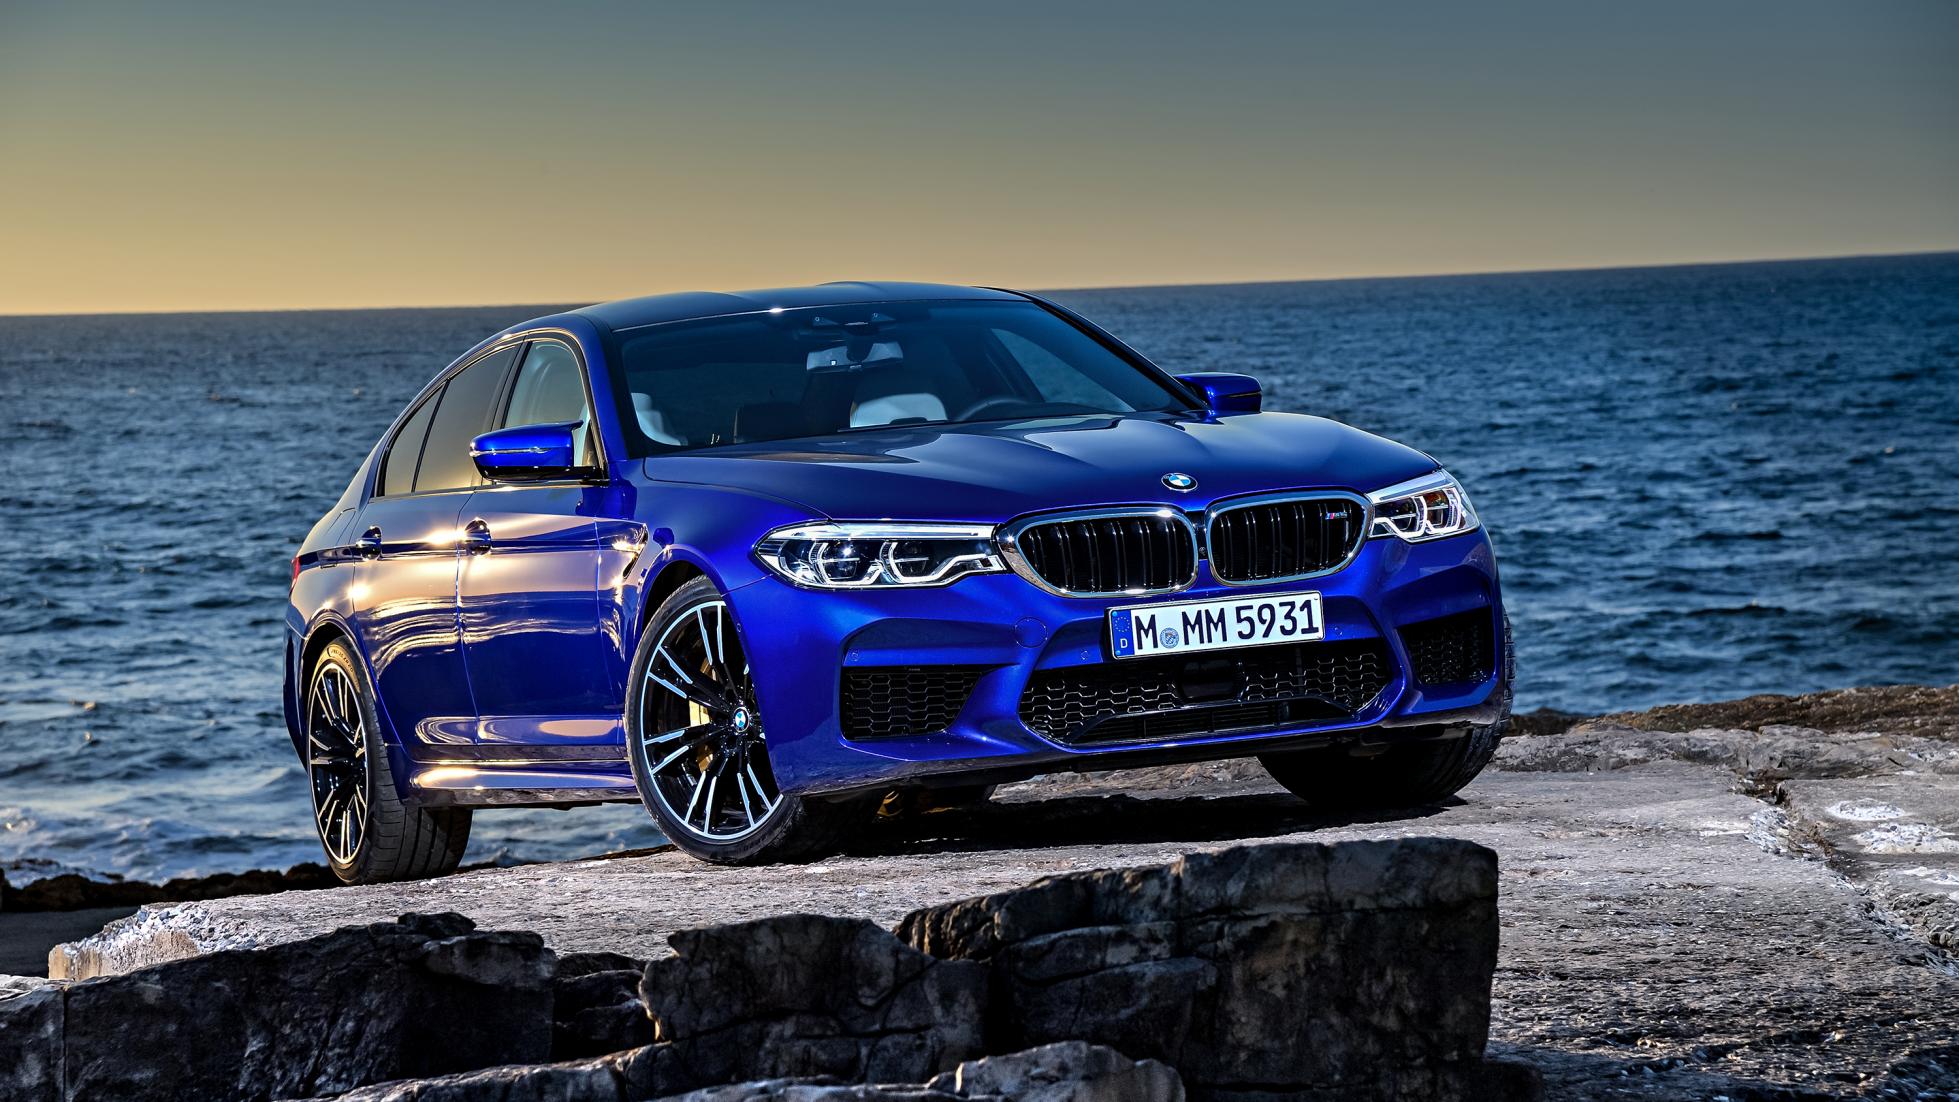 p90286924_highres_the-new-bmw-m5-11-20